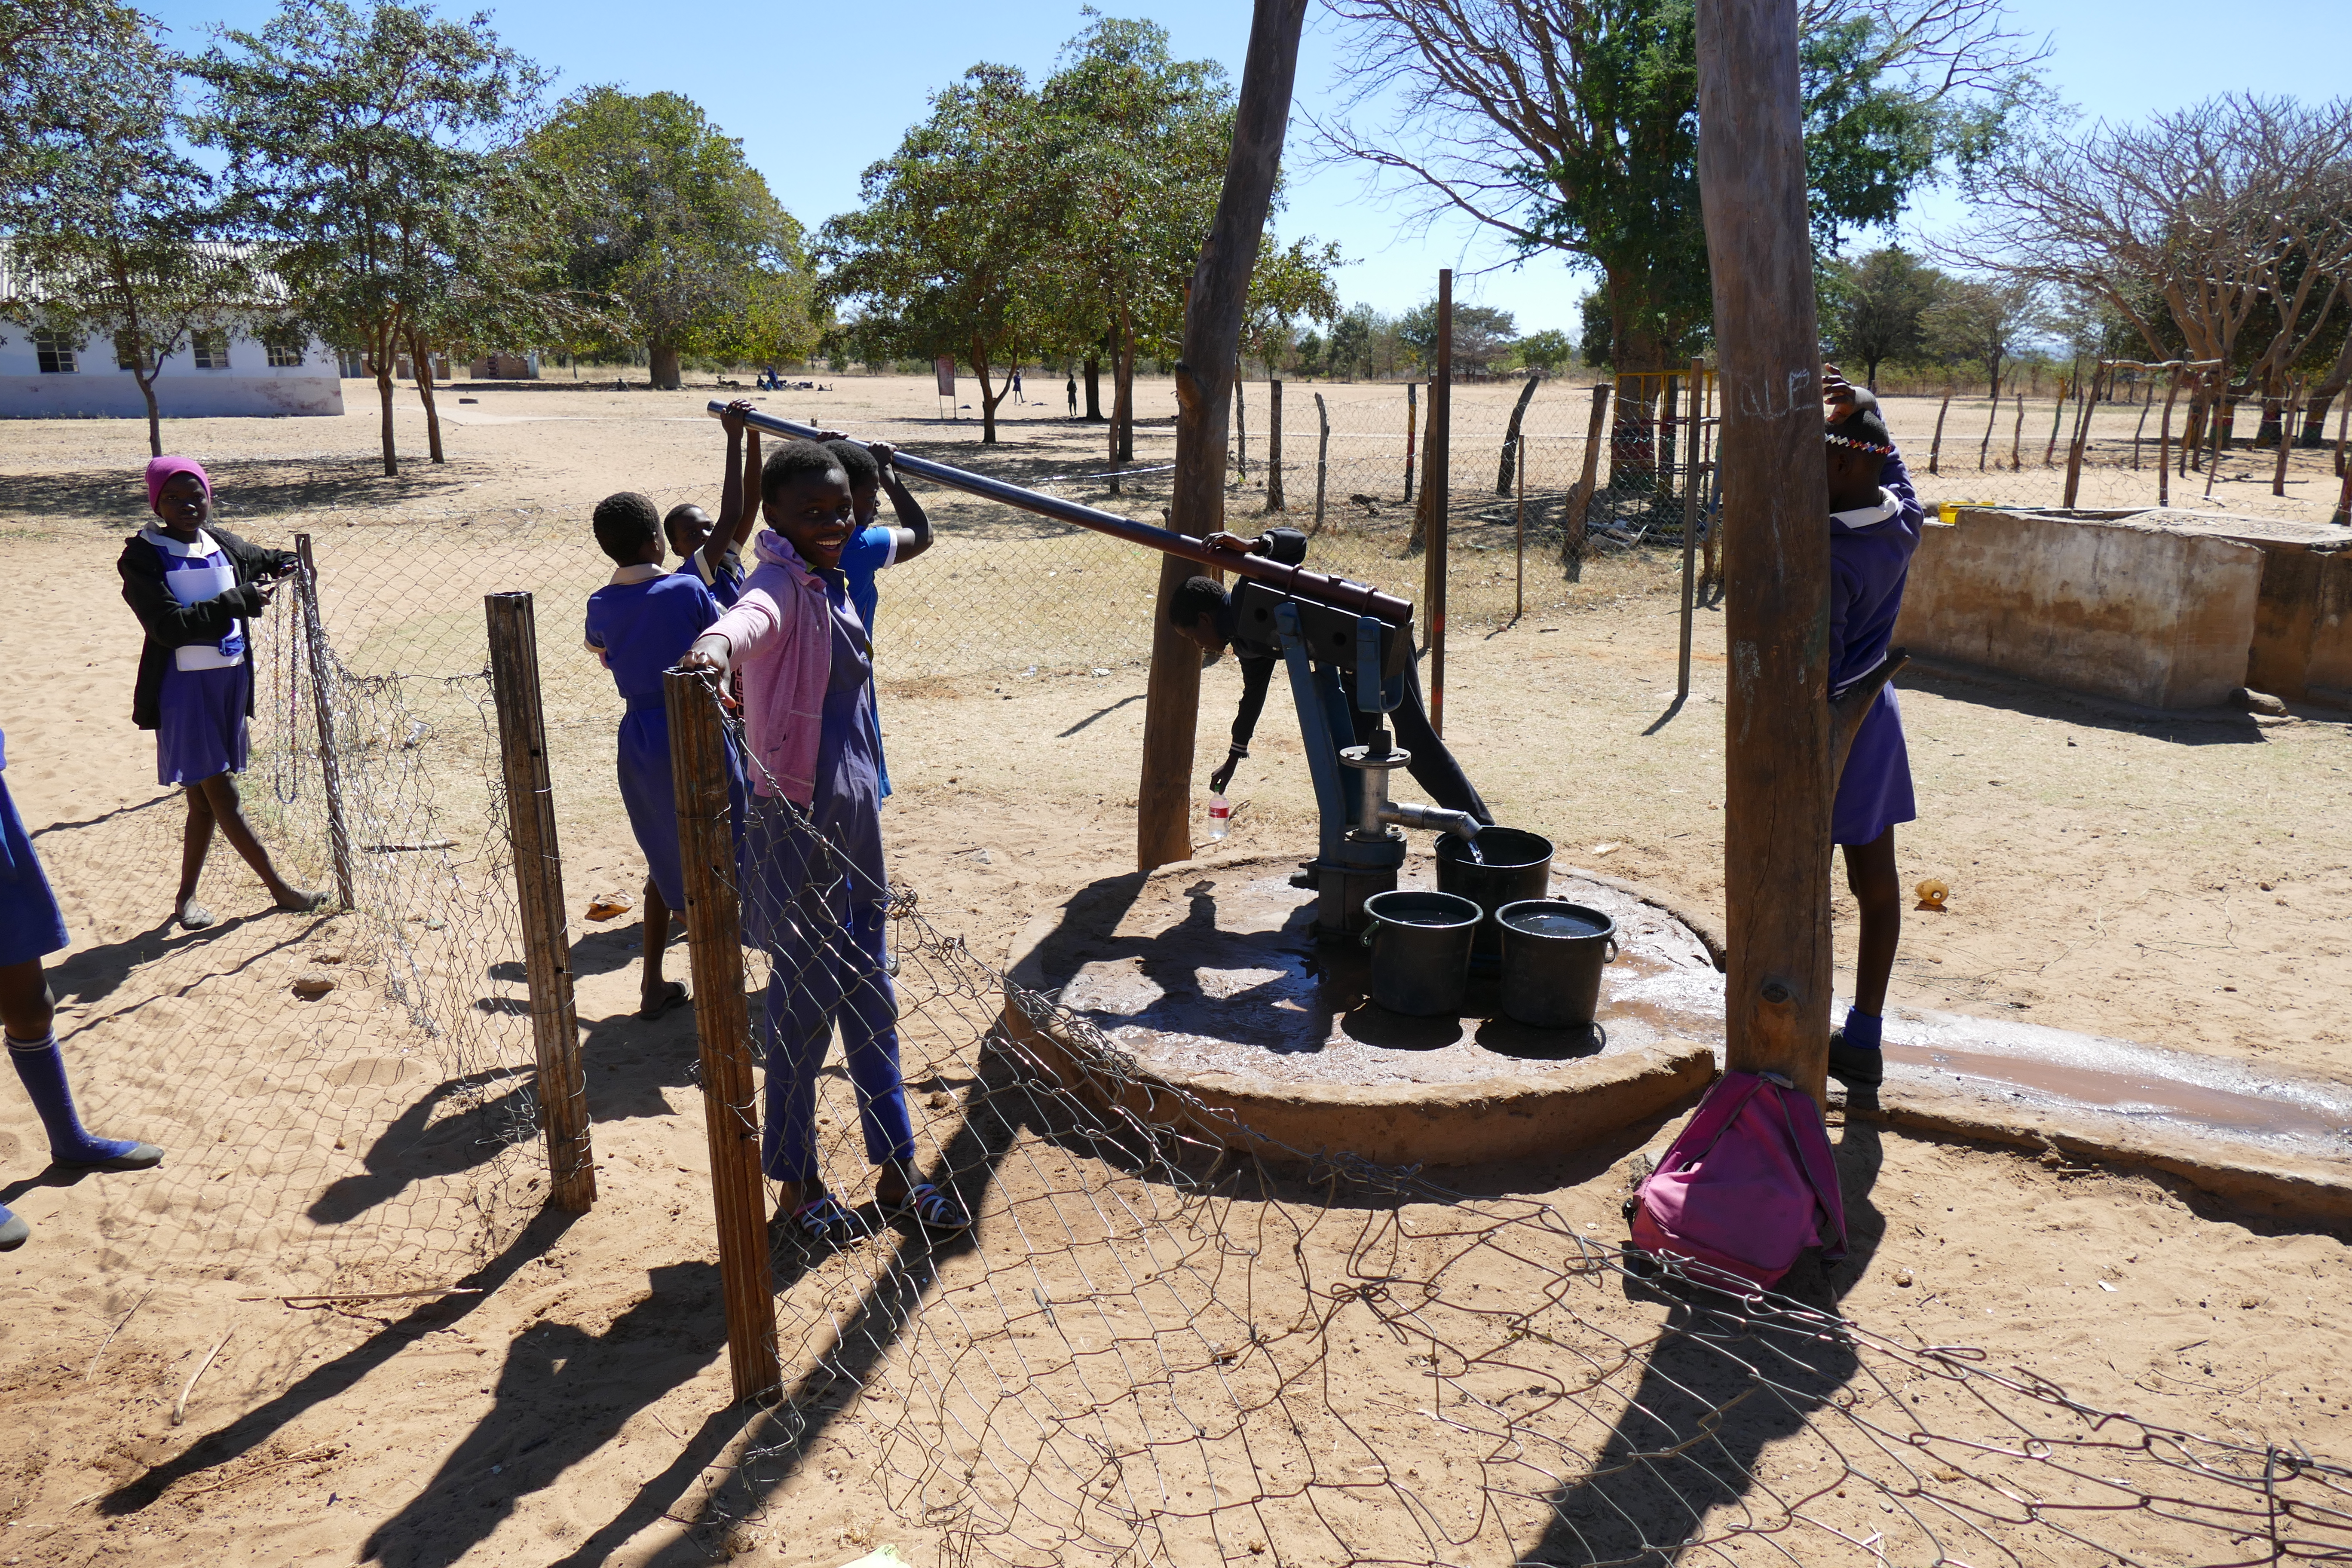 Monde community children working together to pump water to bring back to their homes